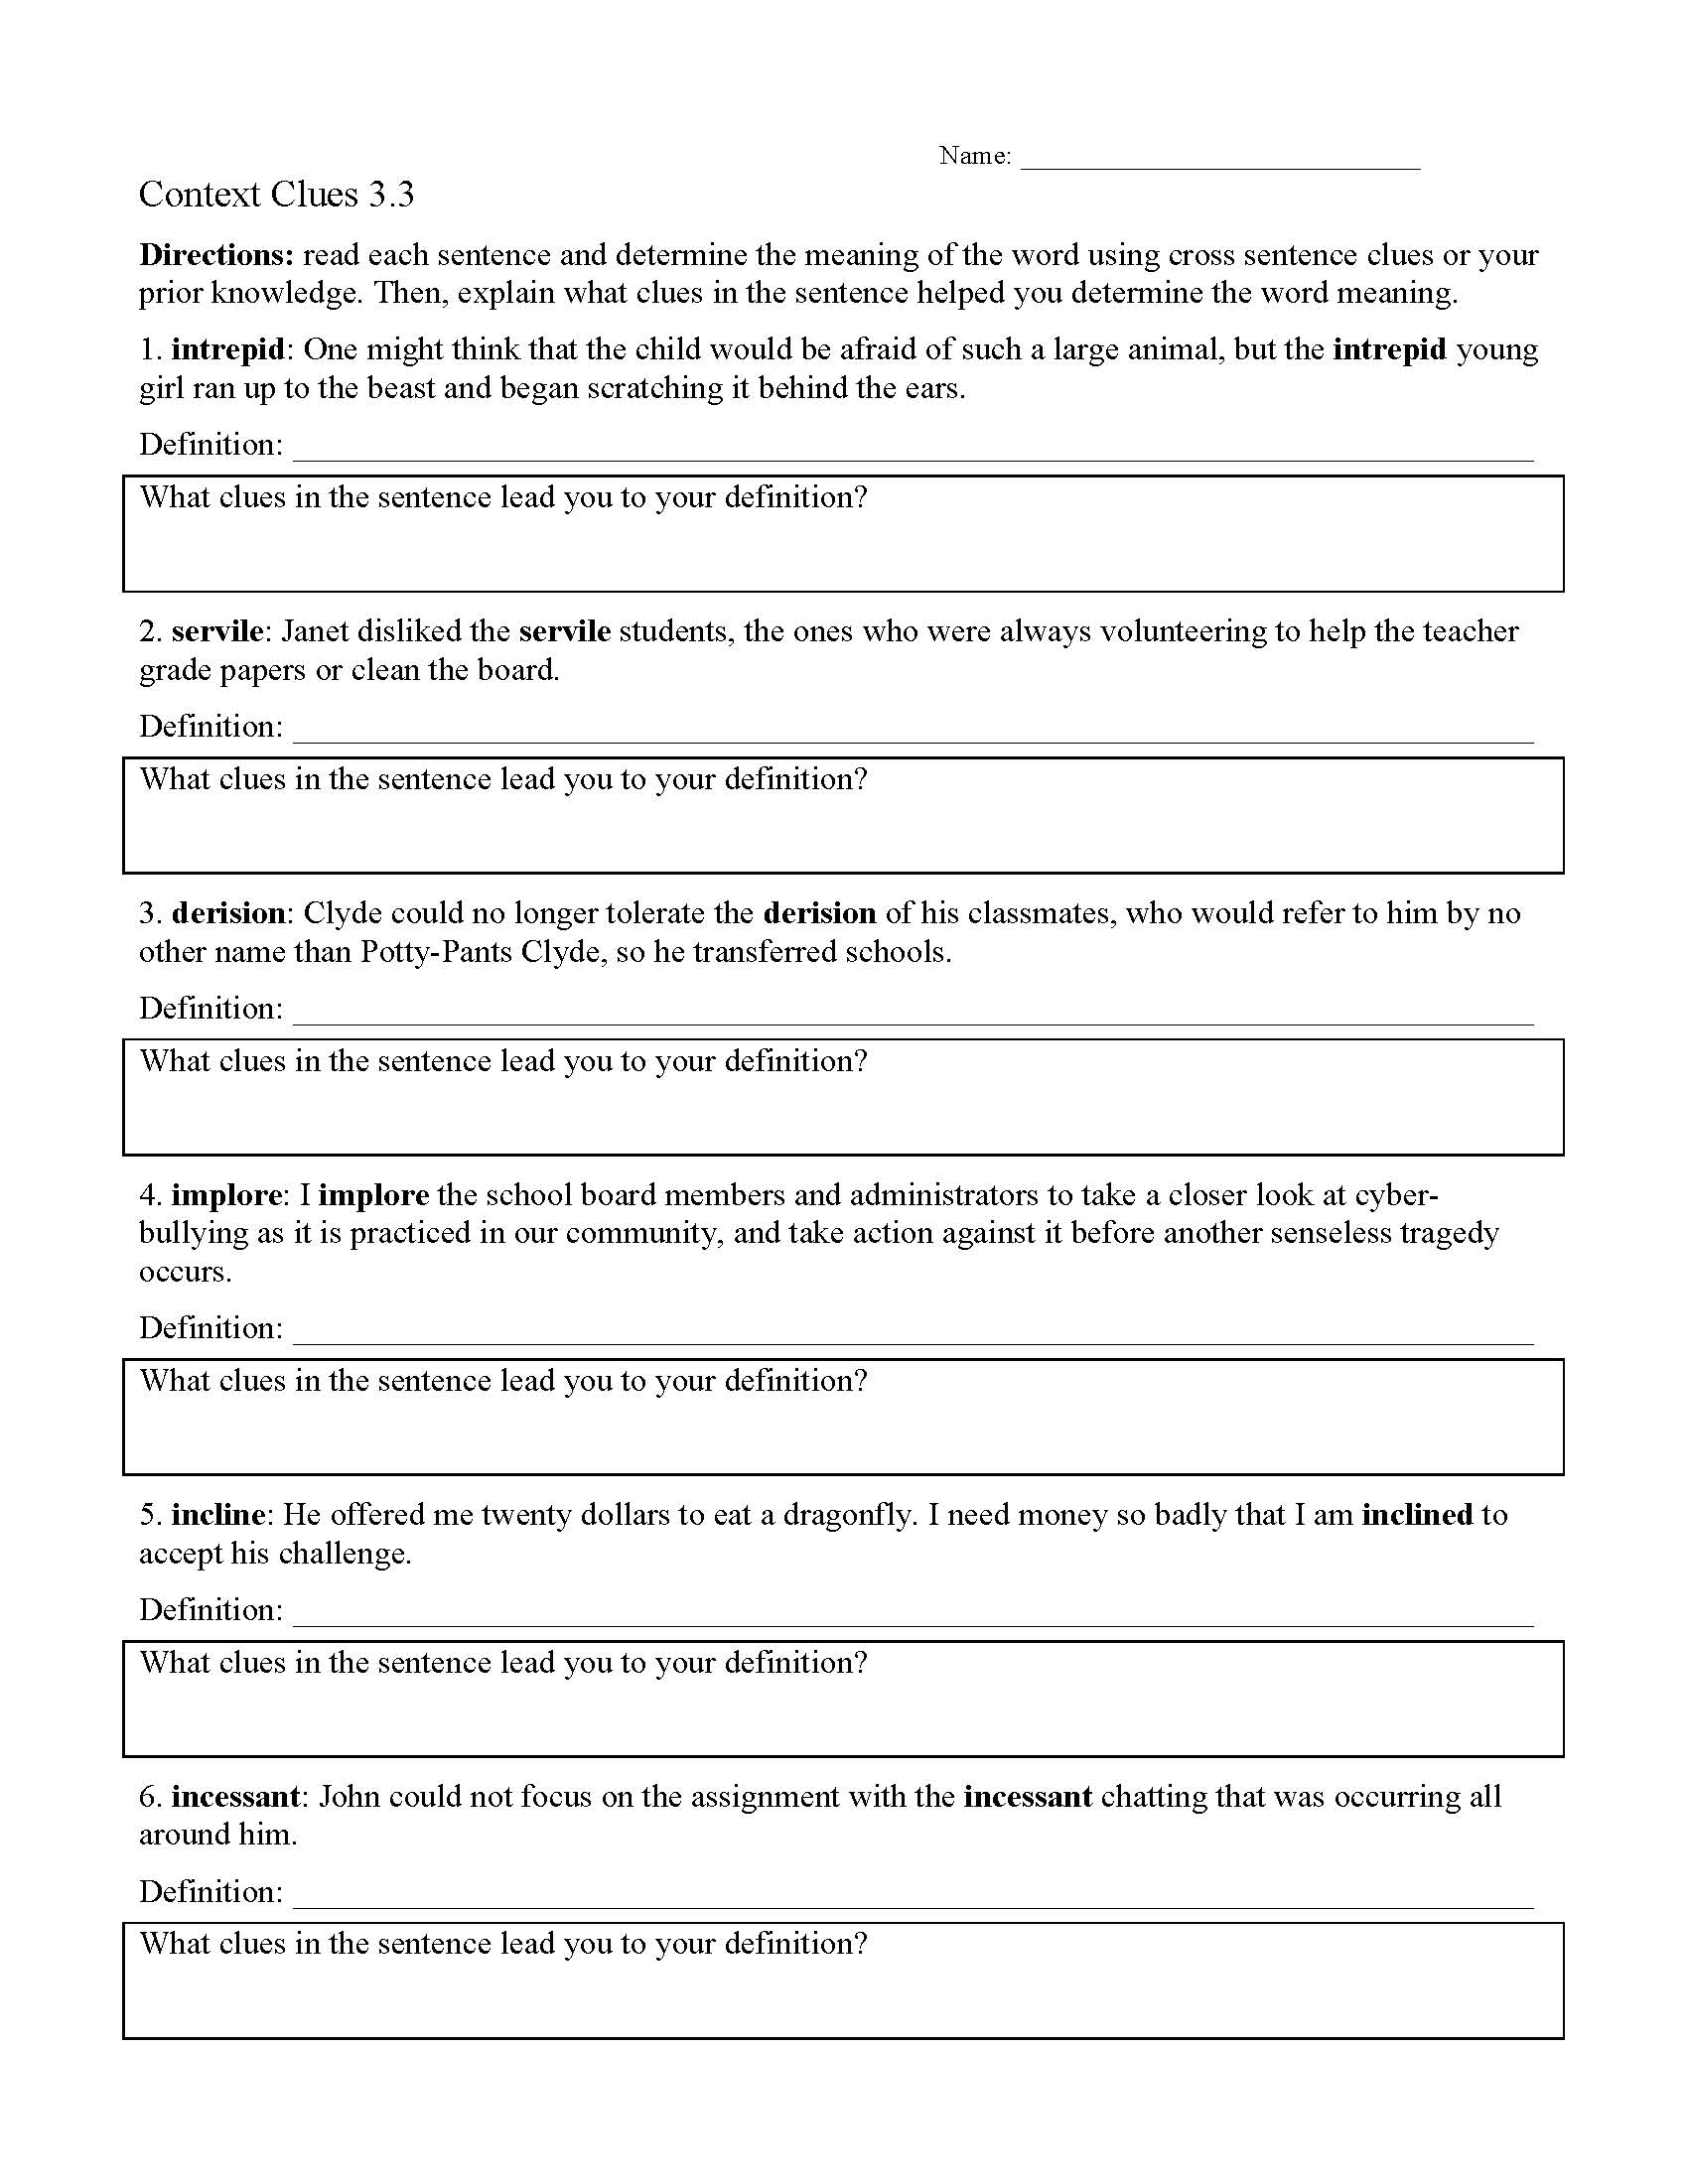 context clues worksheets k5 learning - context clues worksheets